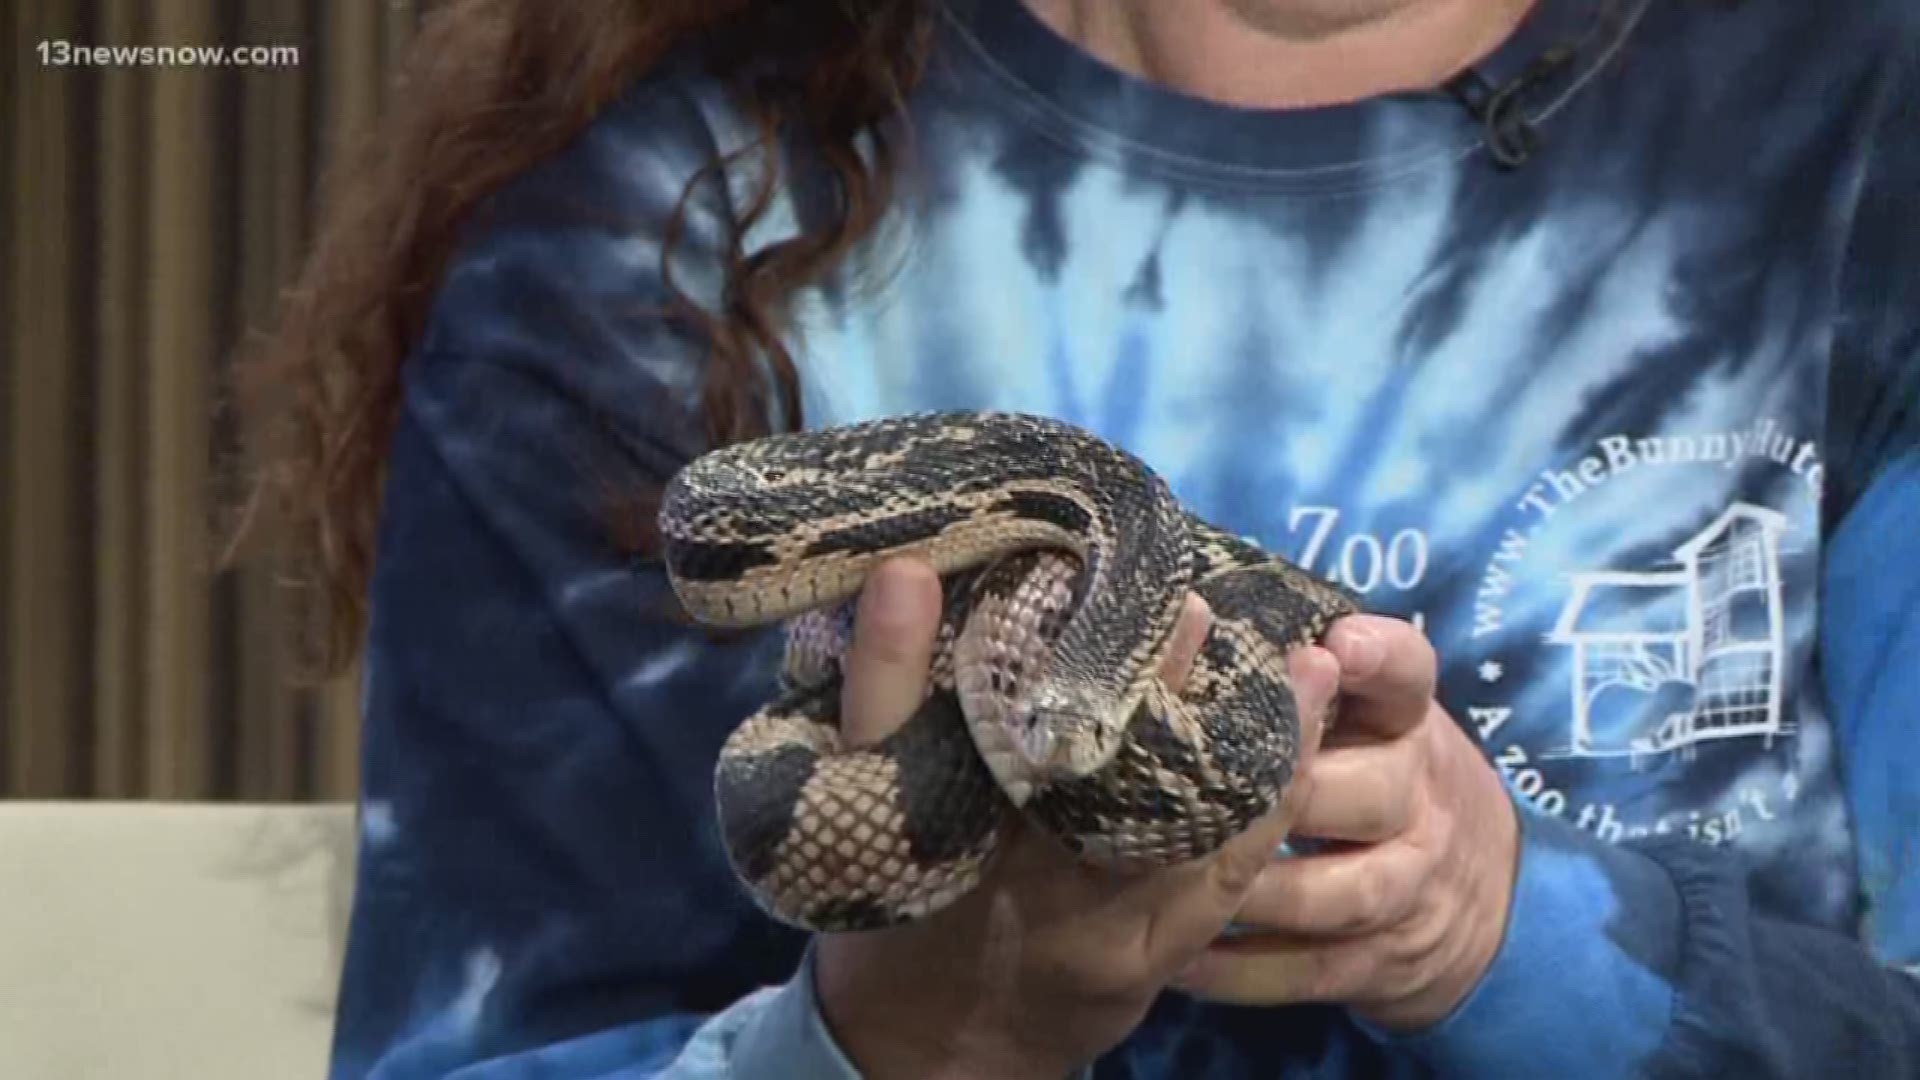 Looking to adopt a reptile? Meet Gravel the Northern Pine Snake. He's available for adoption at the Bunny Hutch.